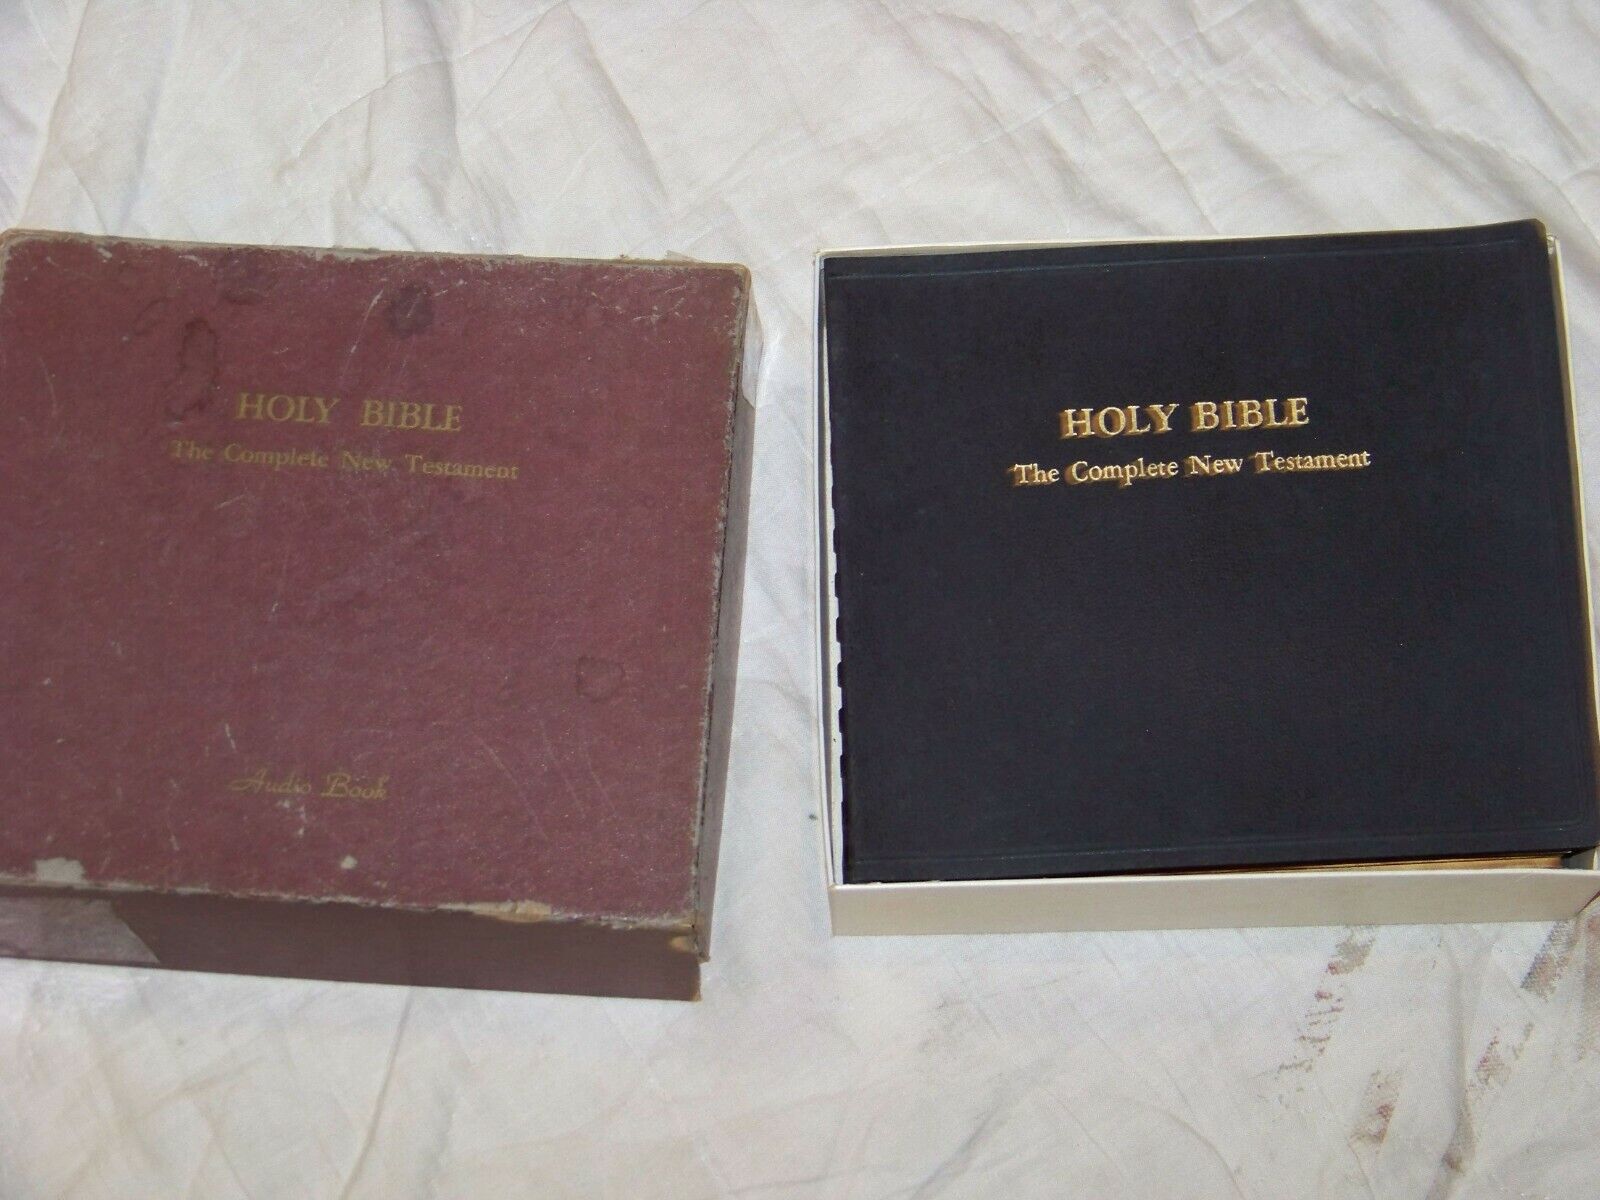 Vintage 1953 HOLY BIBLE The New Testament on 16 rpm Records